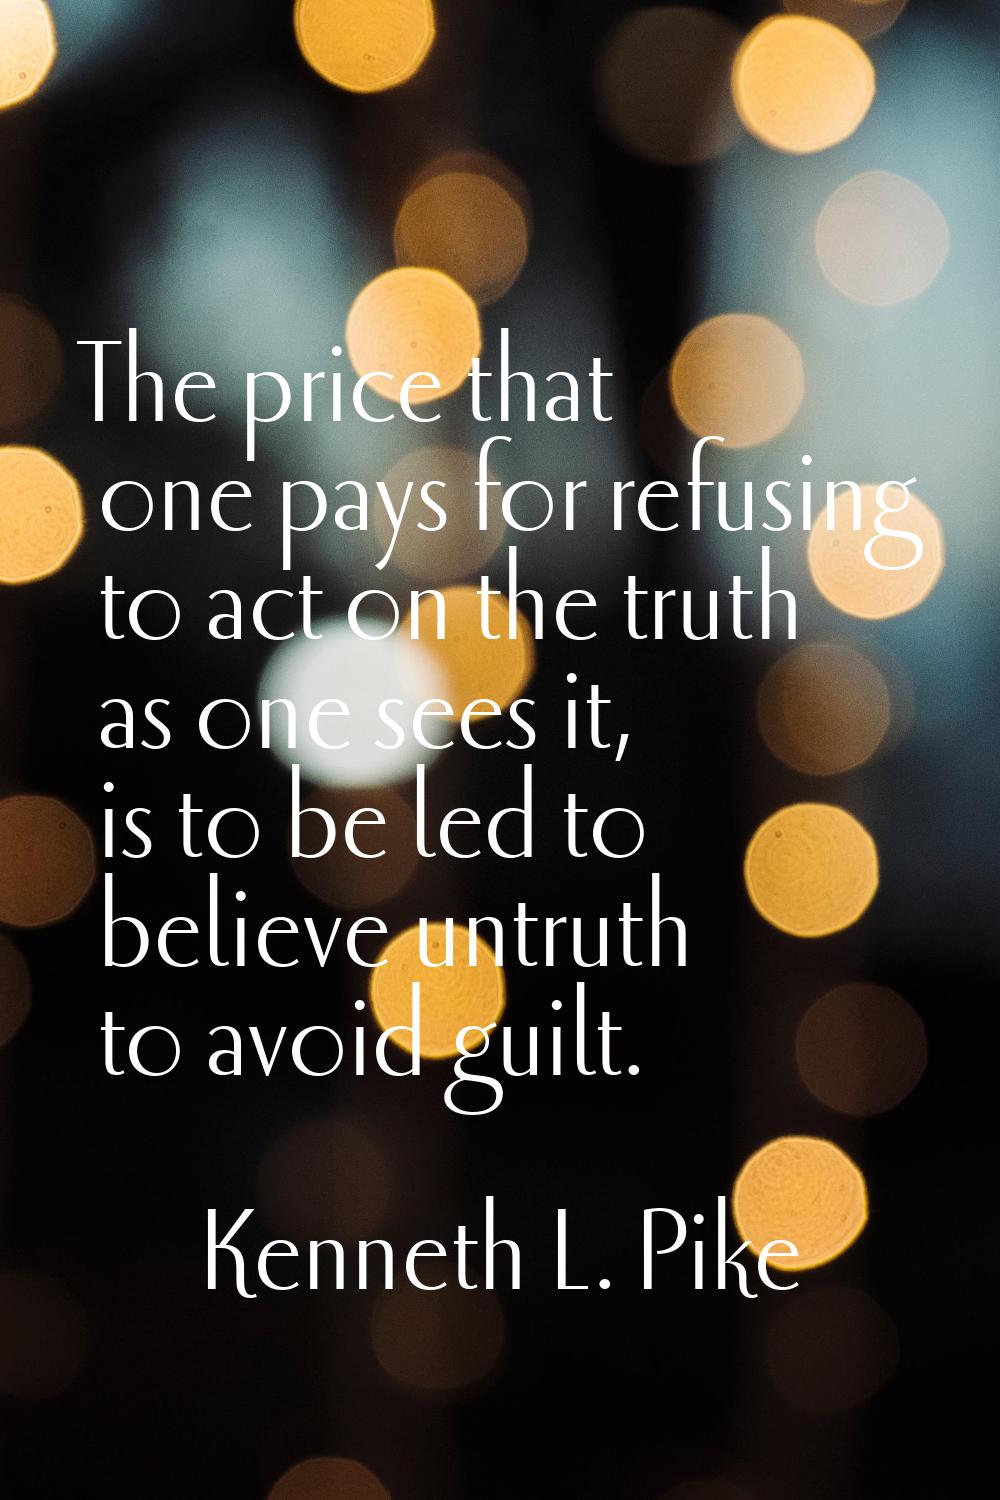 The price that one pays for refusing to act on the truth as one sees it, is to be led to believe un